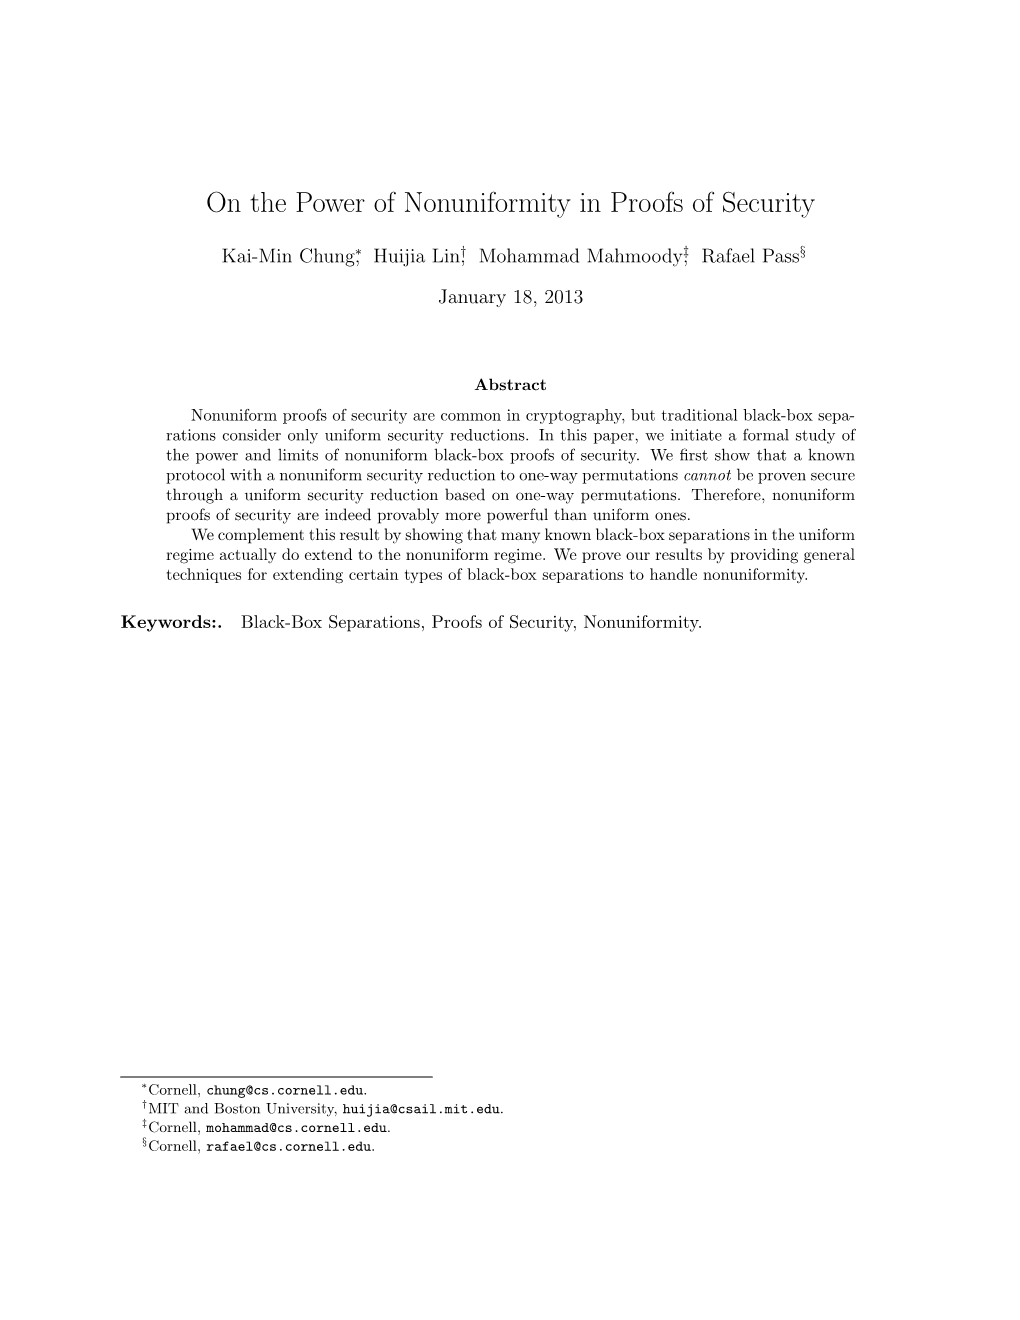 On the Power of Nonuniformity in Proofs of Security